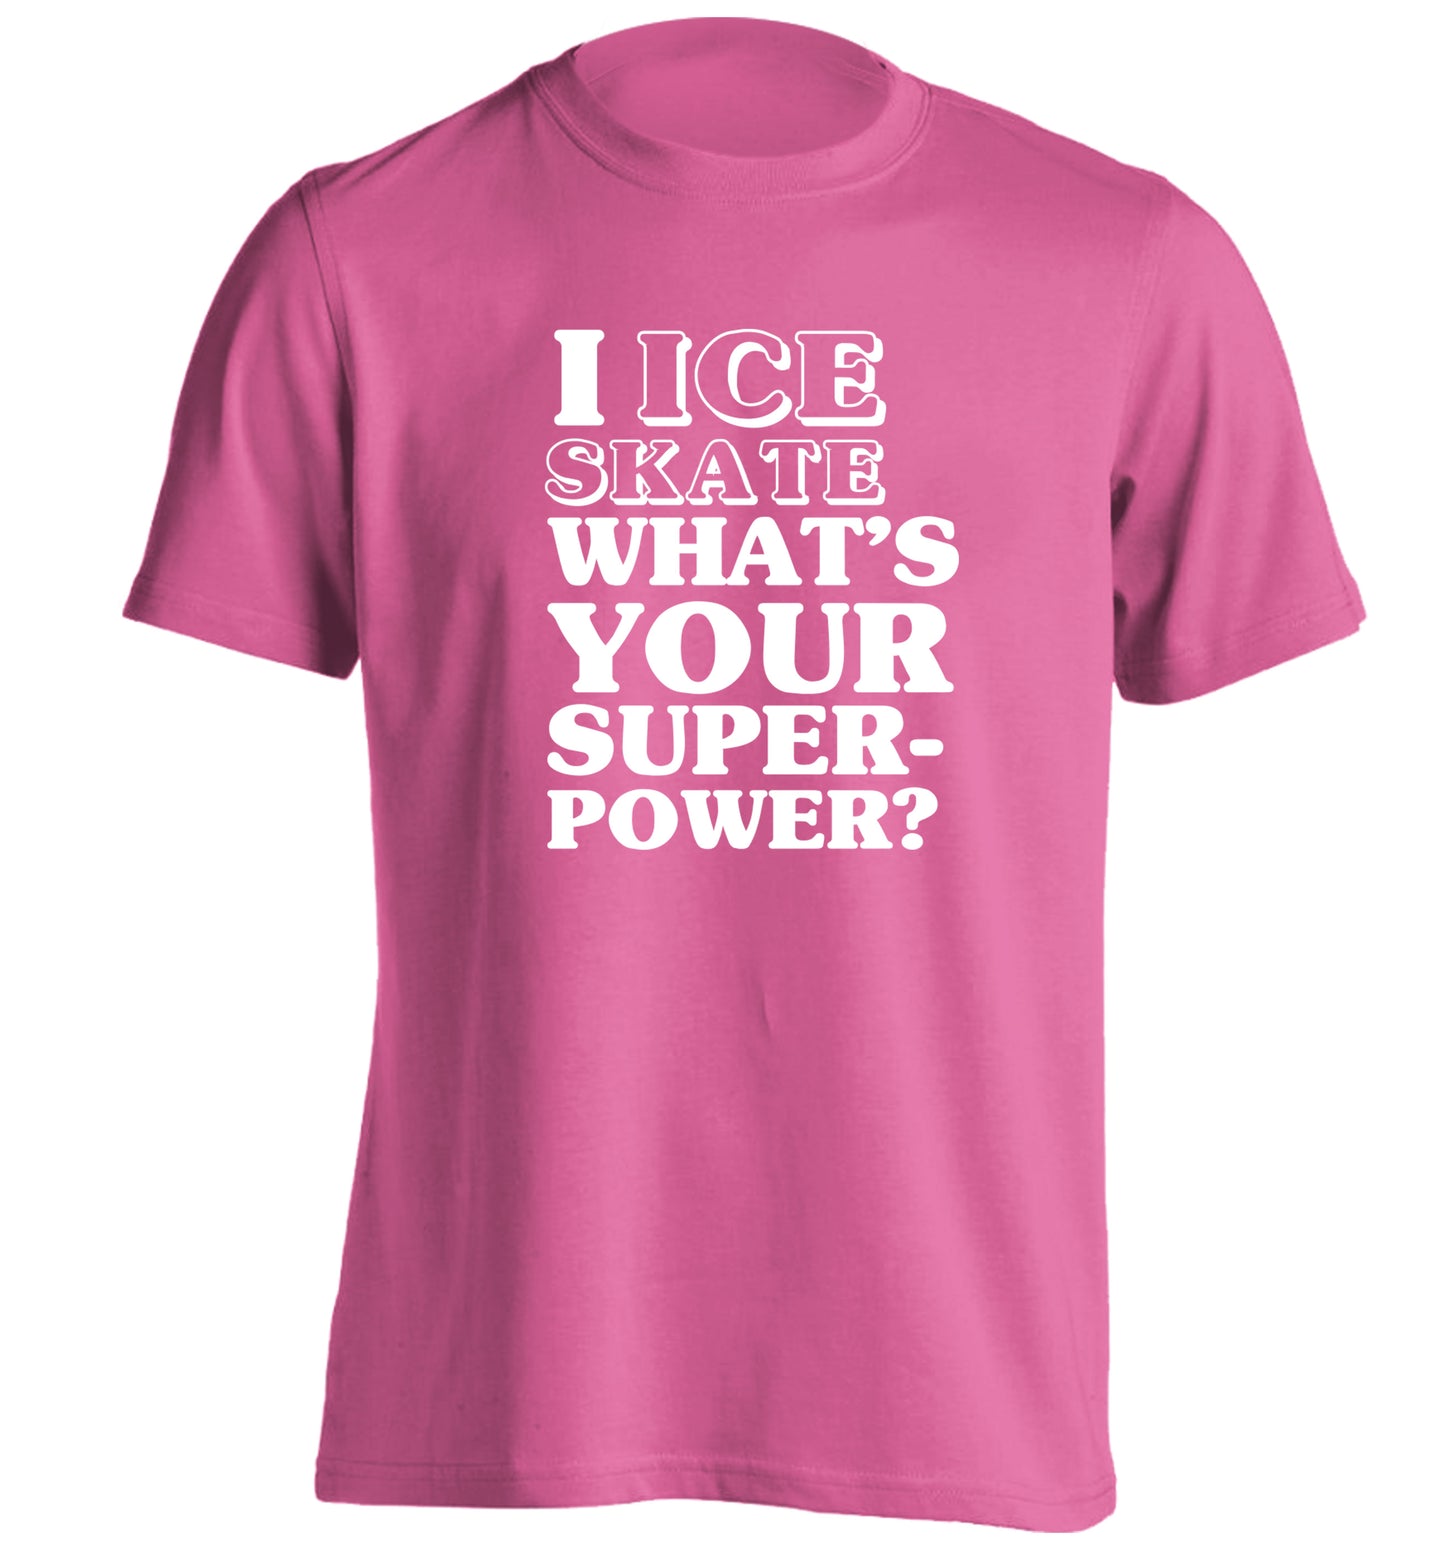 I ice skate what's your superpower? adults unisexpink Tshirt 2XL